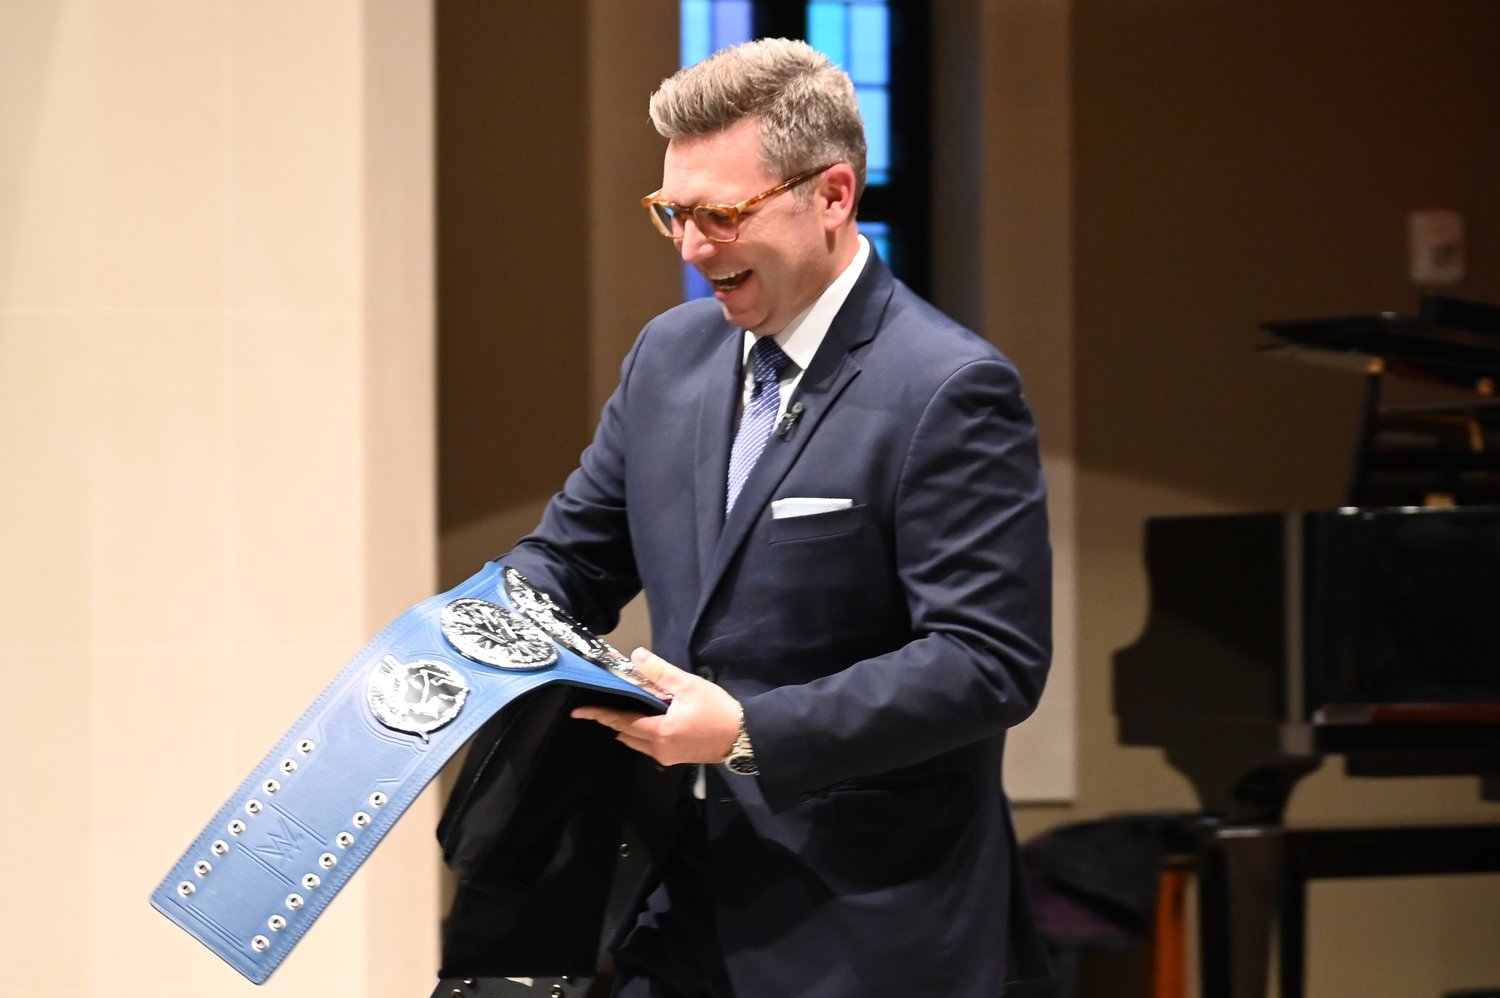 Brent Leatherwood reacts to a WWE championship belt given to him by SBC First Vice President Victor Chayasirisobhon at an installation service on Monday, March 20, 2023. (Index/Roger Alford)